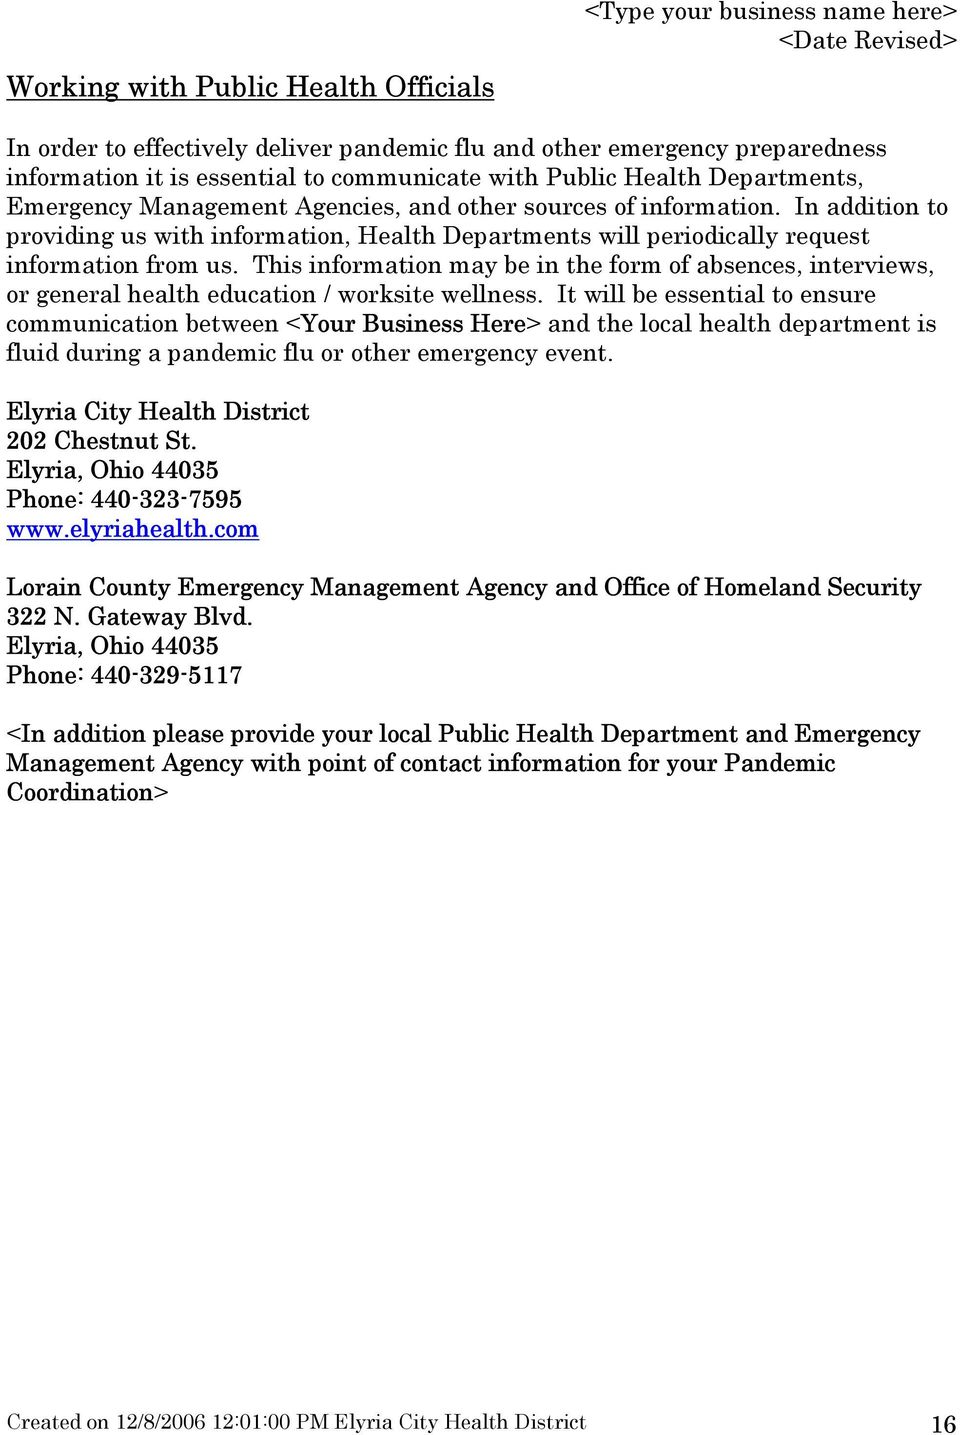 In addition to providing us with information, Health Departments will periodically request information from us.